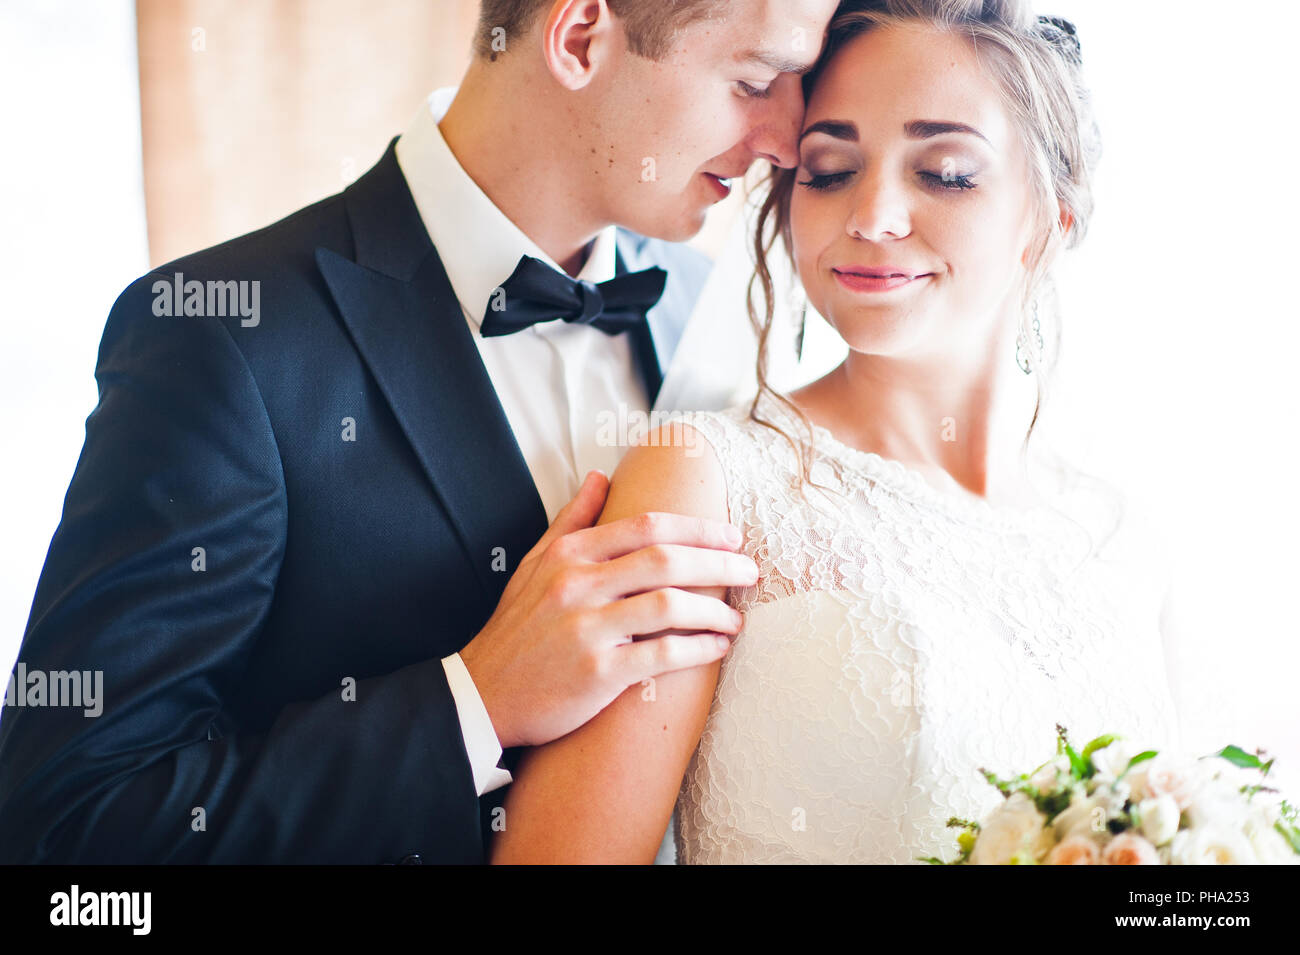 Close up portrait of wedding couple at gentle touch Stock Photo